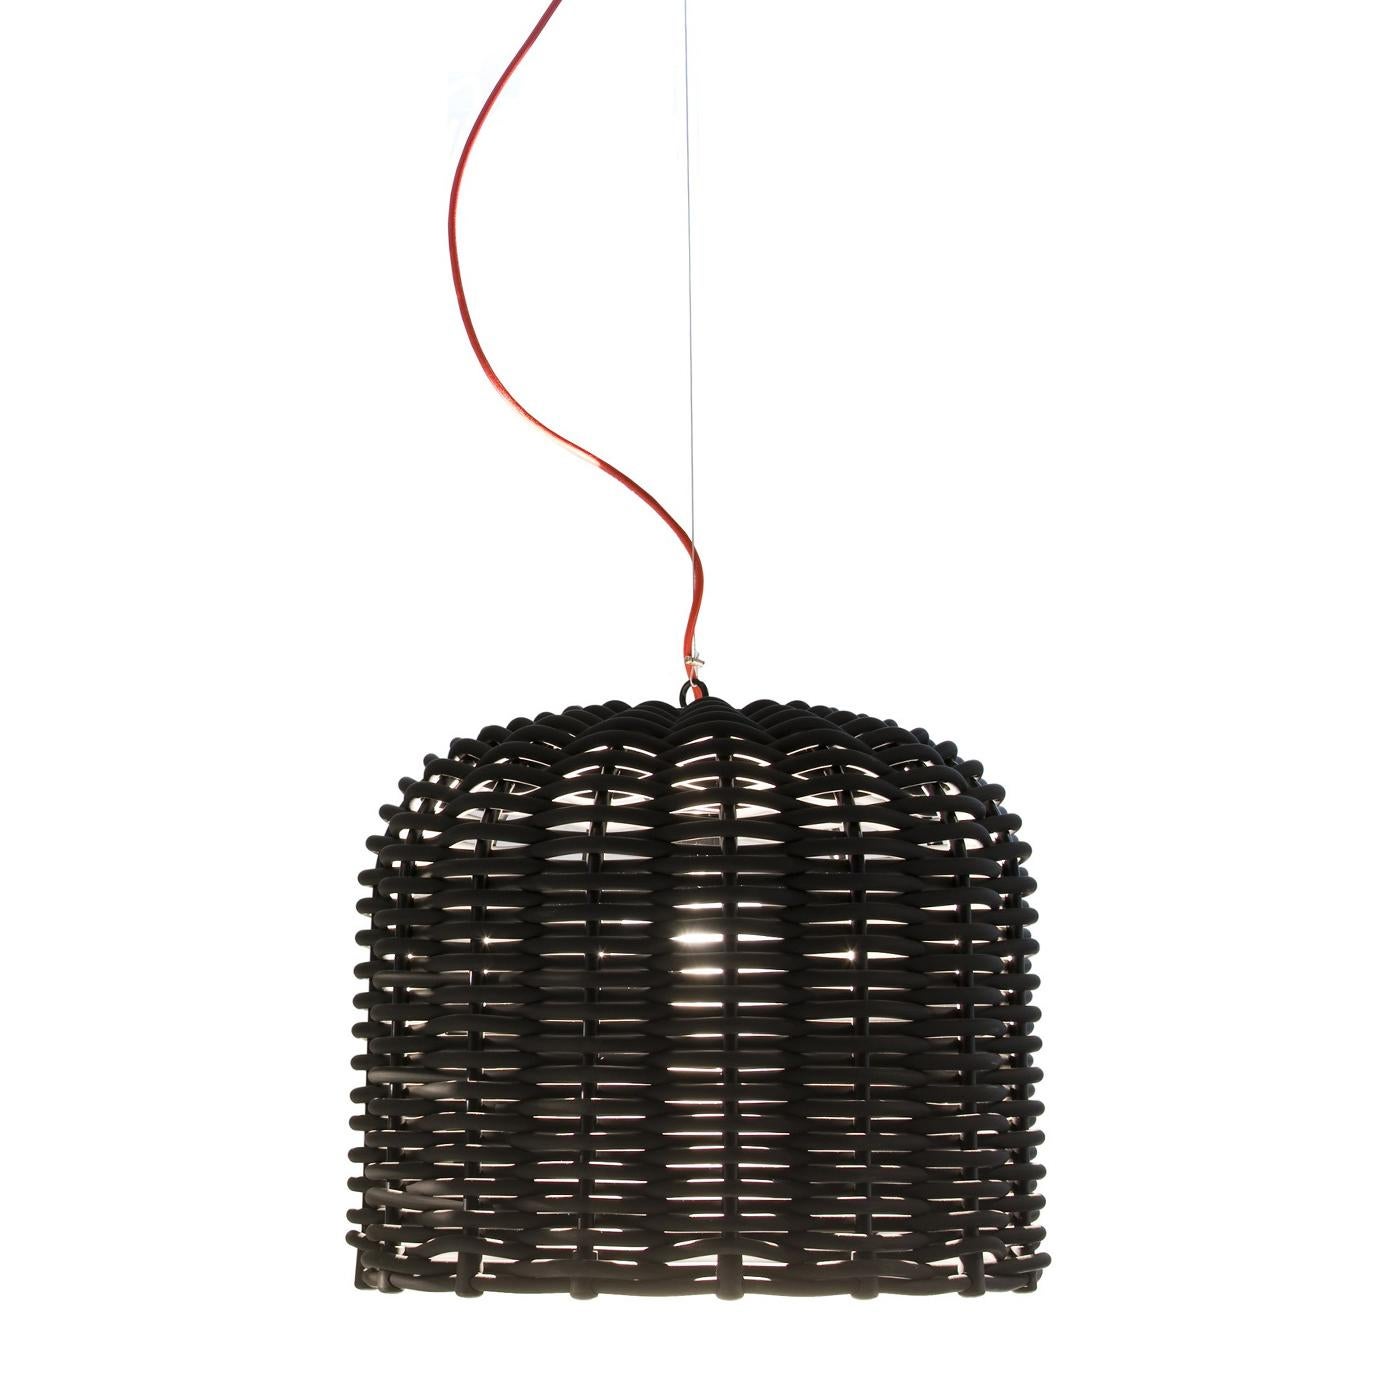 Suspension Ambra high black all in woven PVC in black matt finish.
For 1 bulb, lamp holder type E27, max 18 Watt, 220 Volts.
Bulb not included. Delivered with 250cm electric cable and 
with 200 cm steel cable.
Also available in woven PVC in